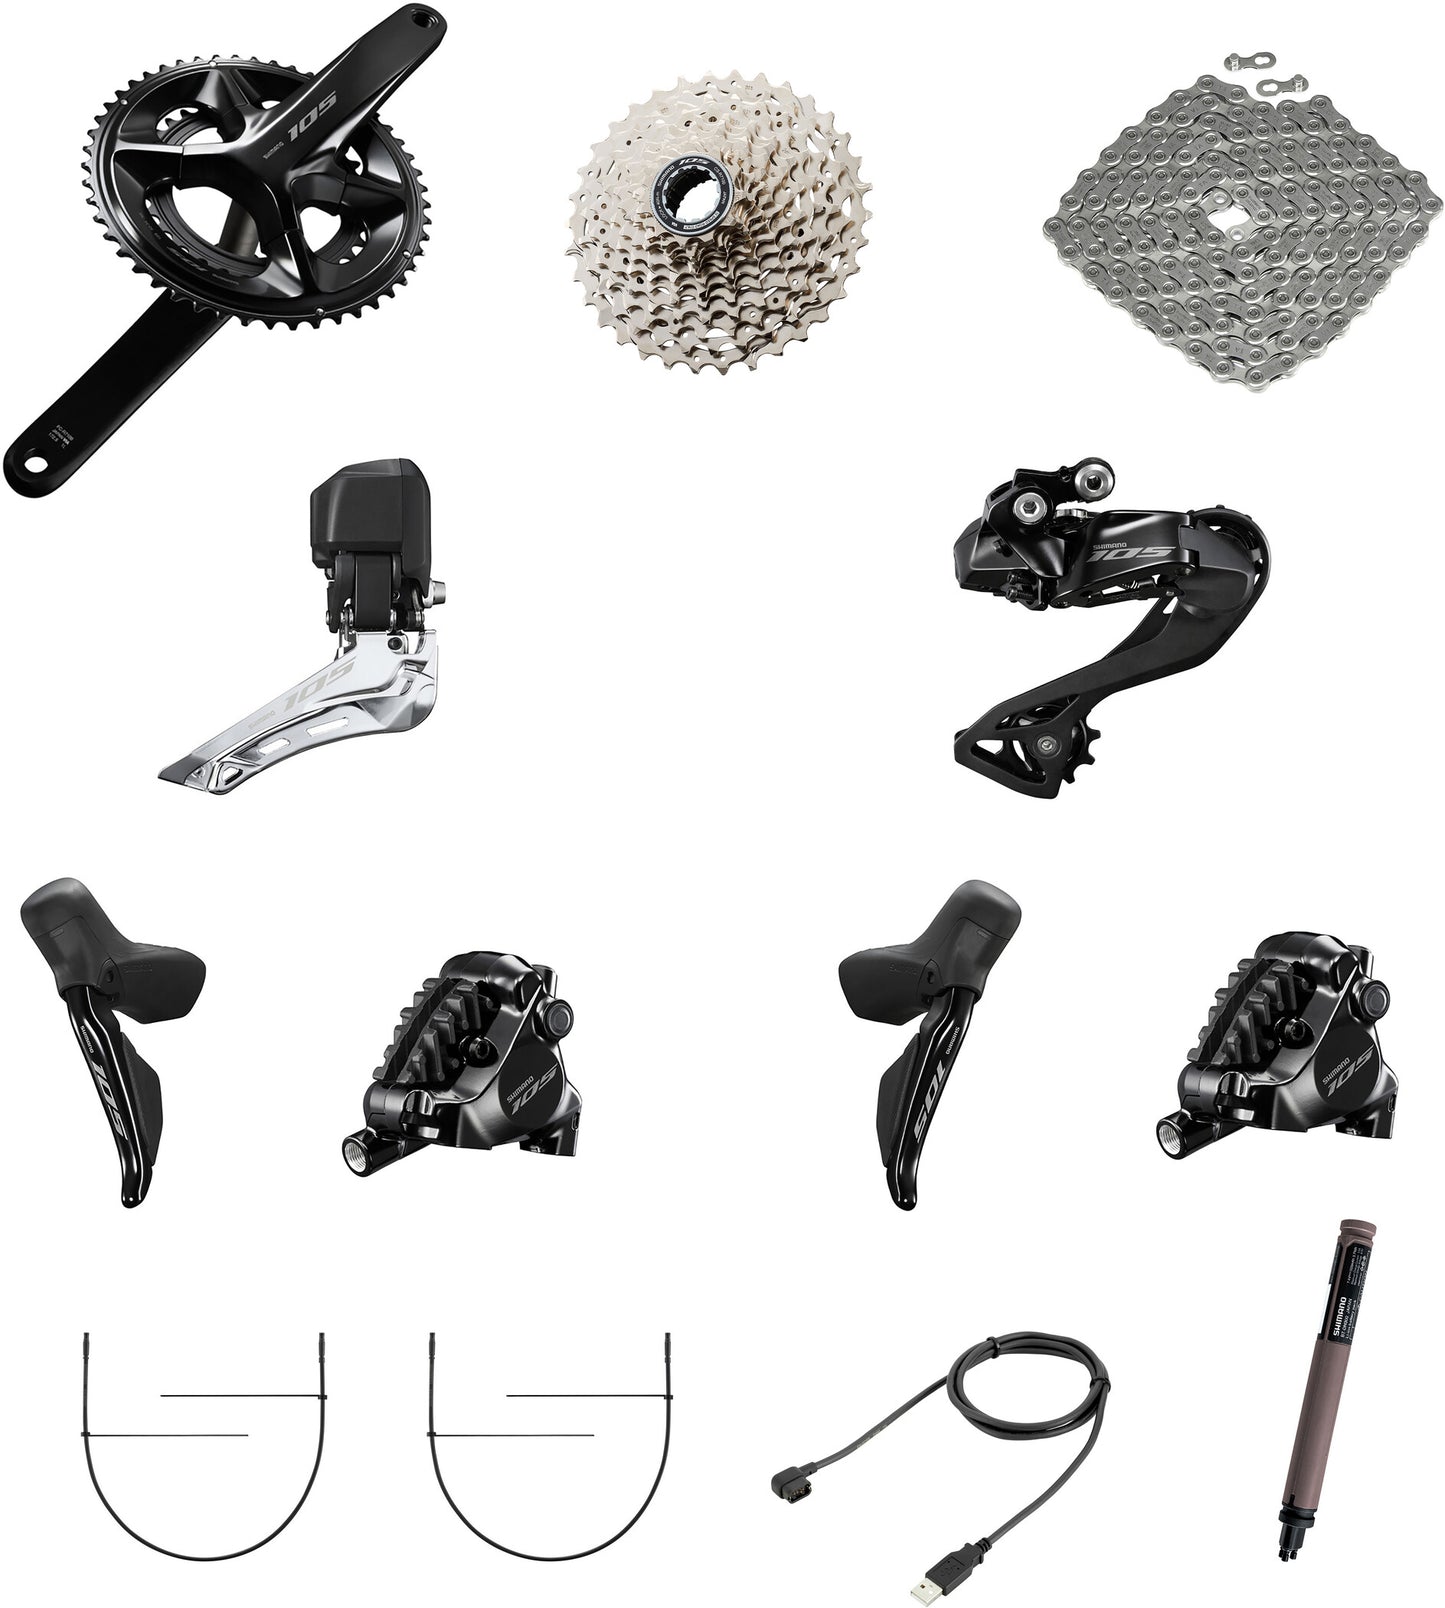 Shimano groupe complet 105 di2 r7100 12v